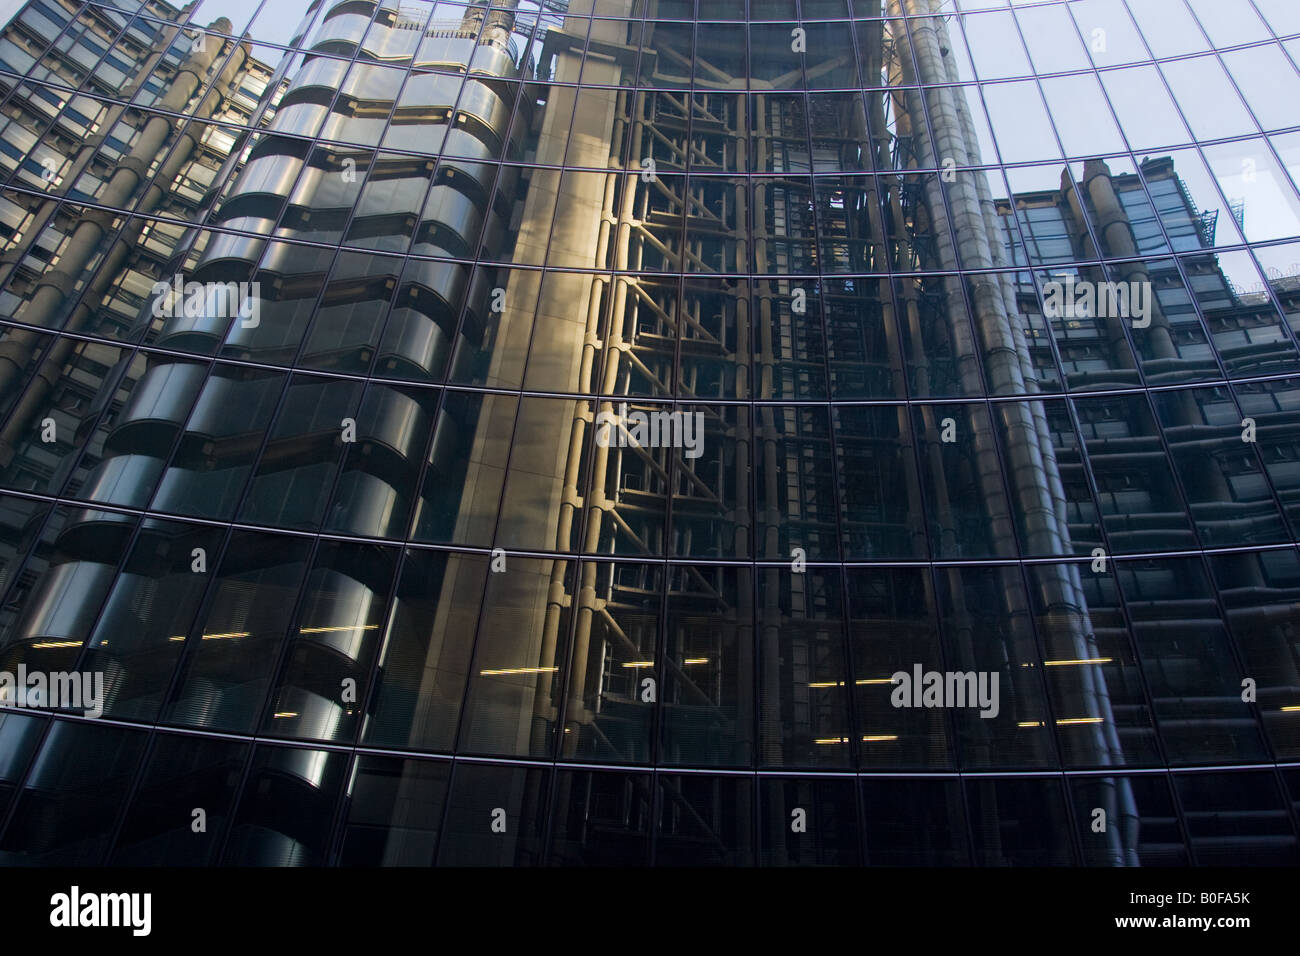 The Lloyds Building reflected in the windows of The Willis Building London England United Kingdom Stock Photo